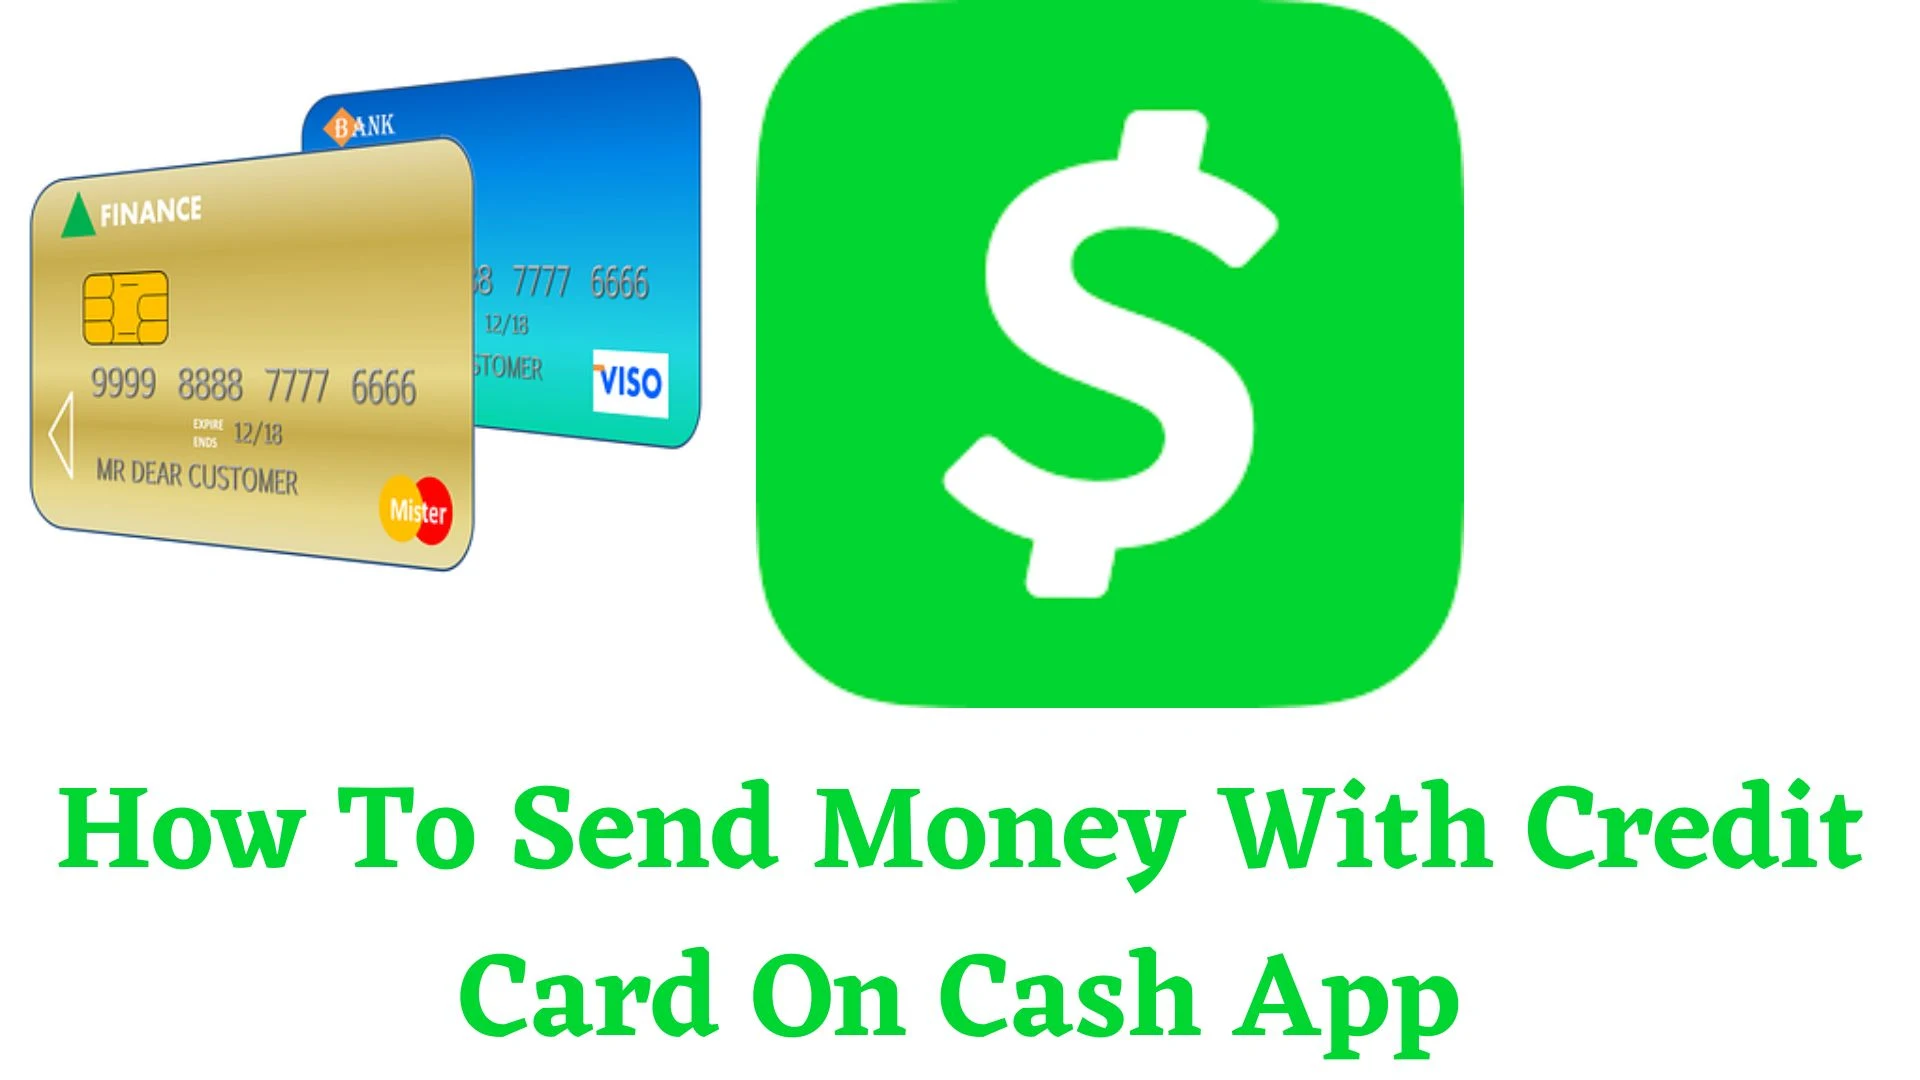 Send Money With Credit Card On Cash App